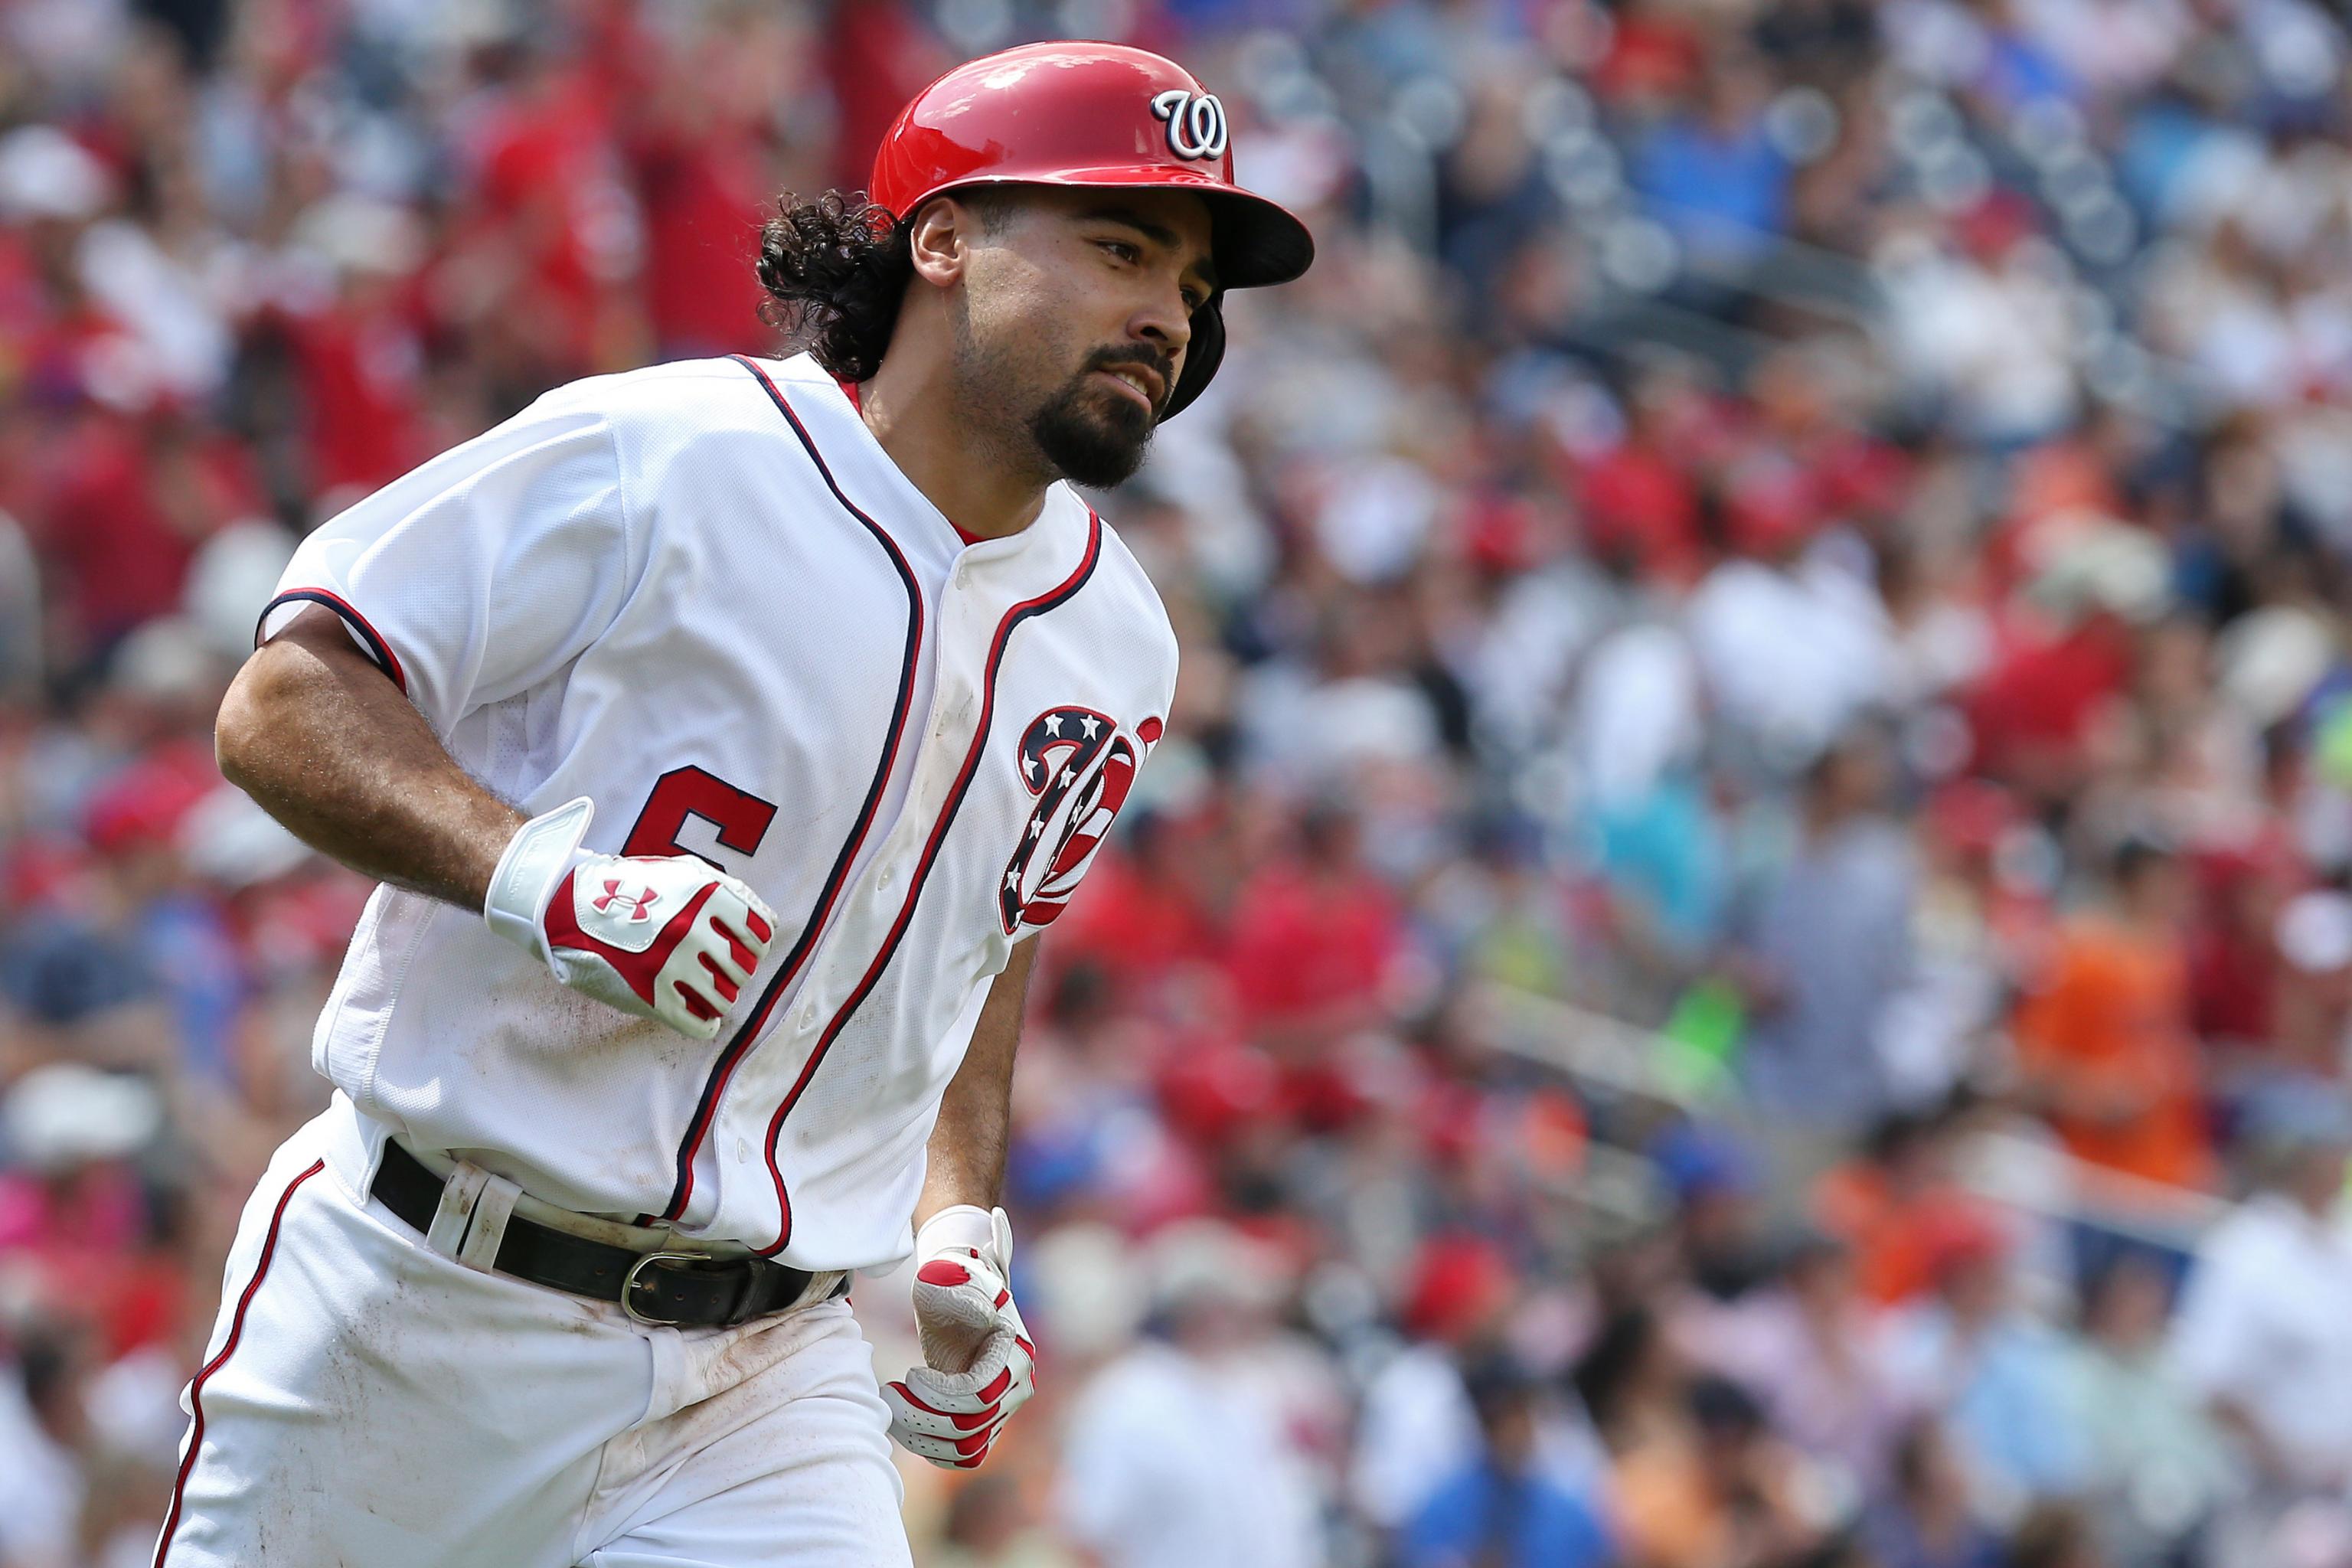 Anthony Rendon 2020 Game Used Jersey - 9/19 vs. TEX